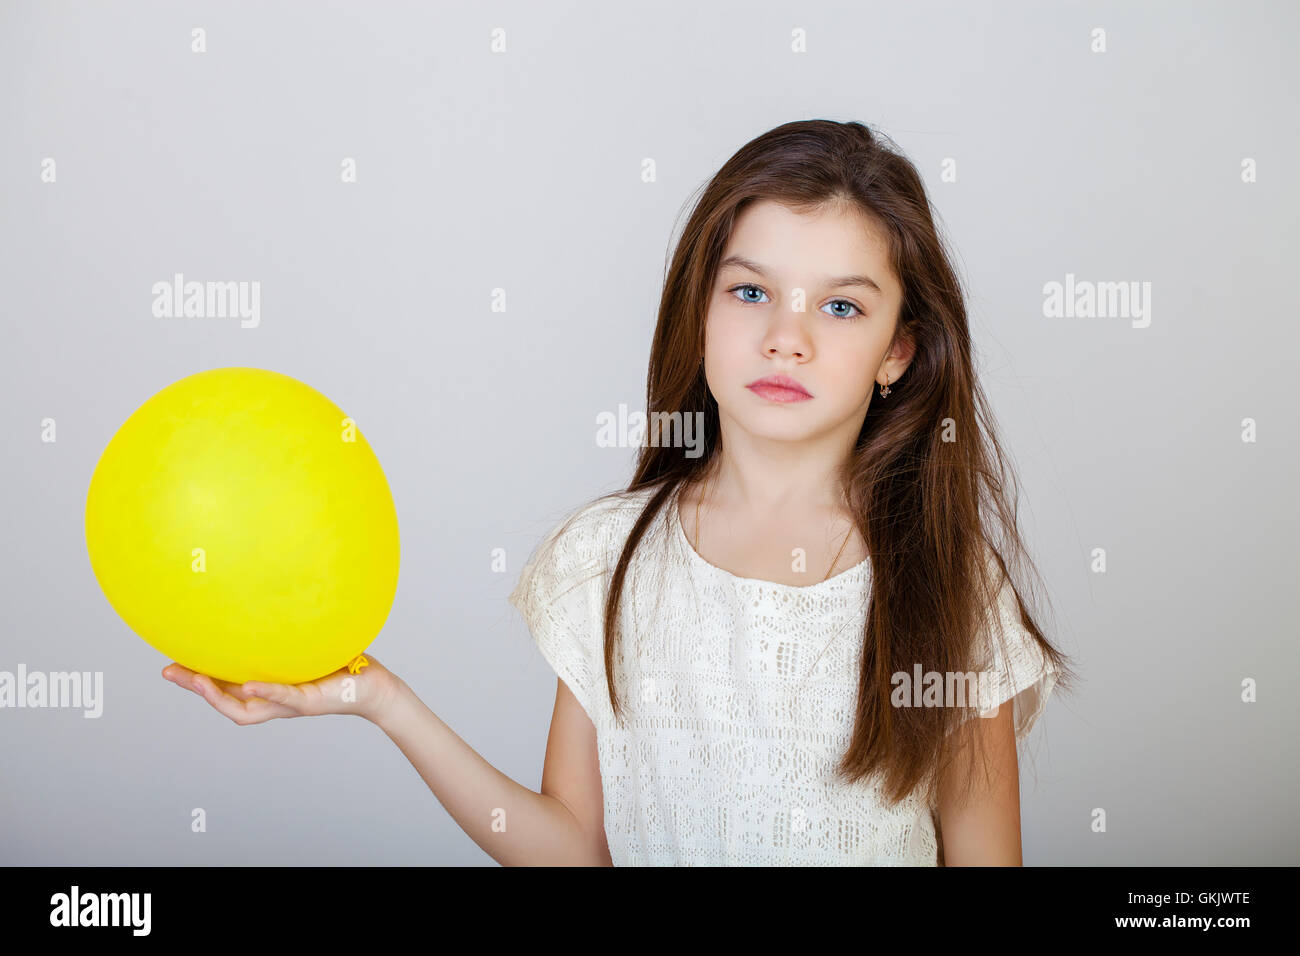 Portrait of a charming brunette little girl, isolated on gray background Stock Photo